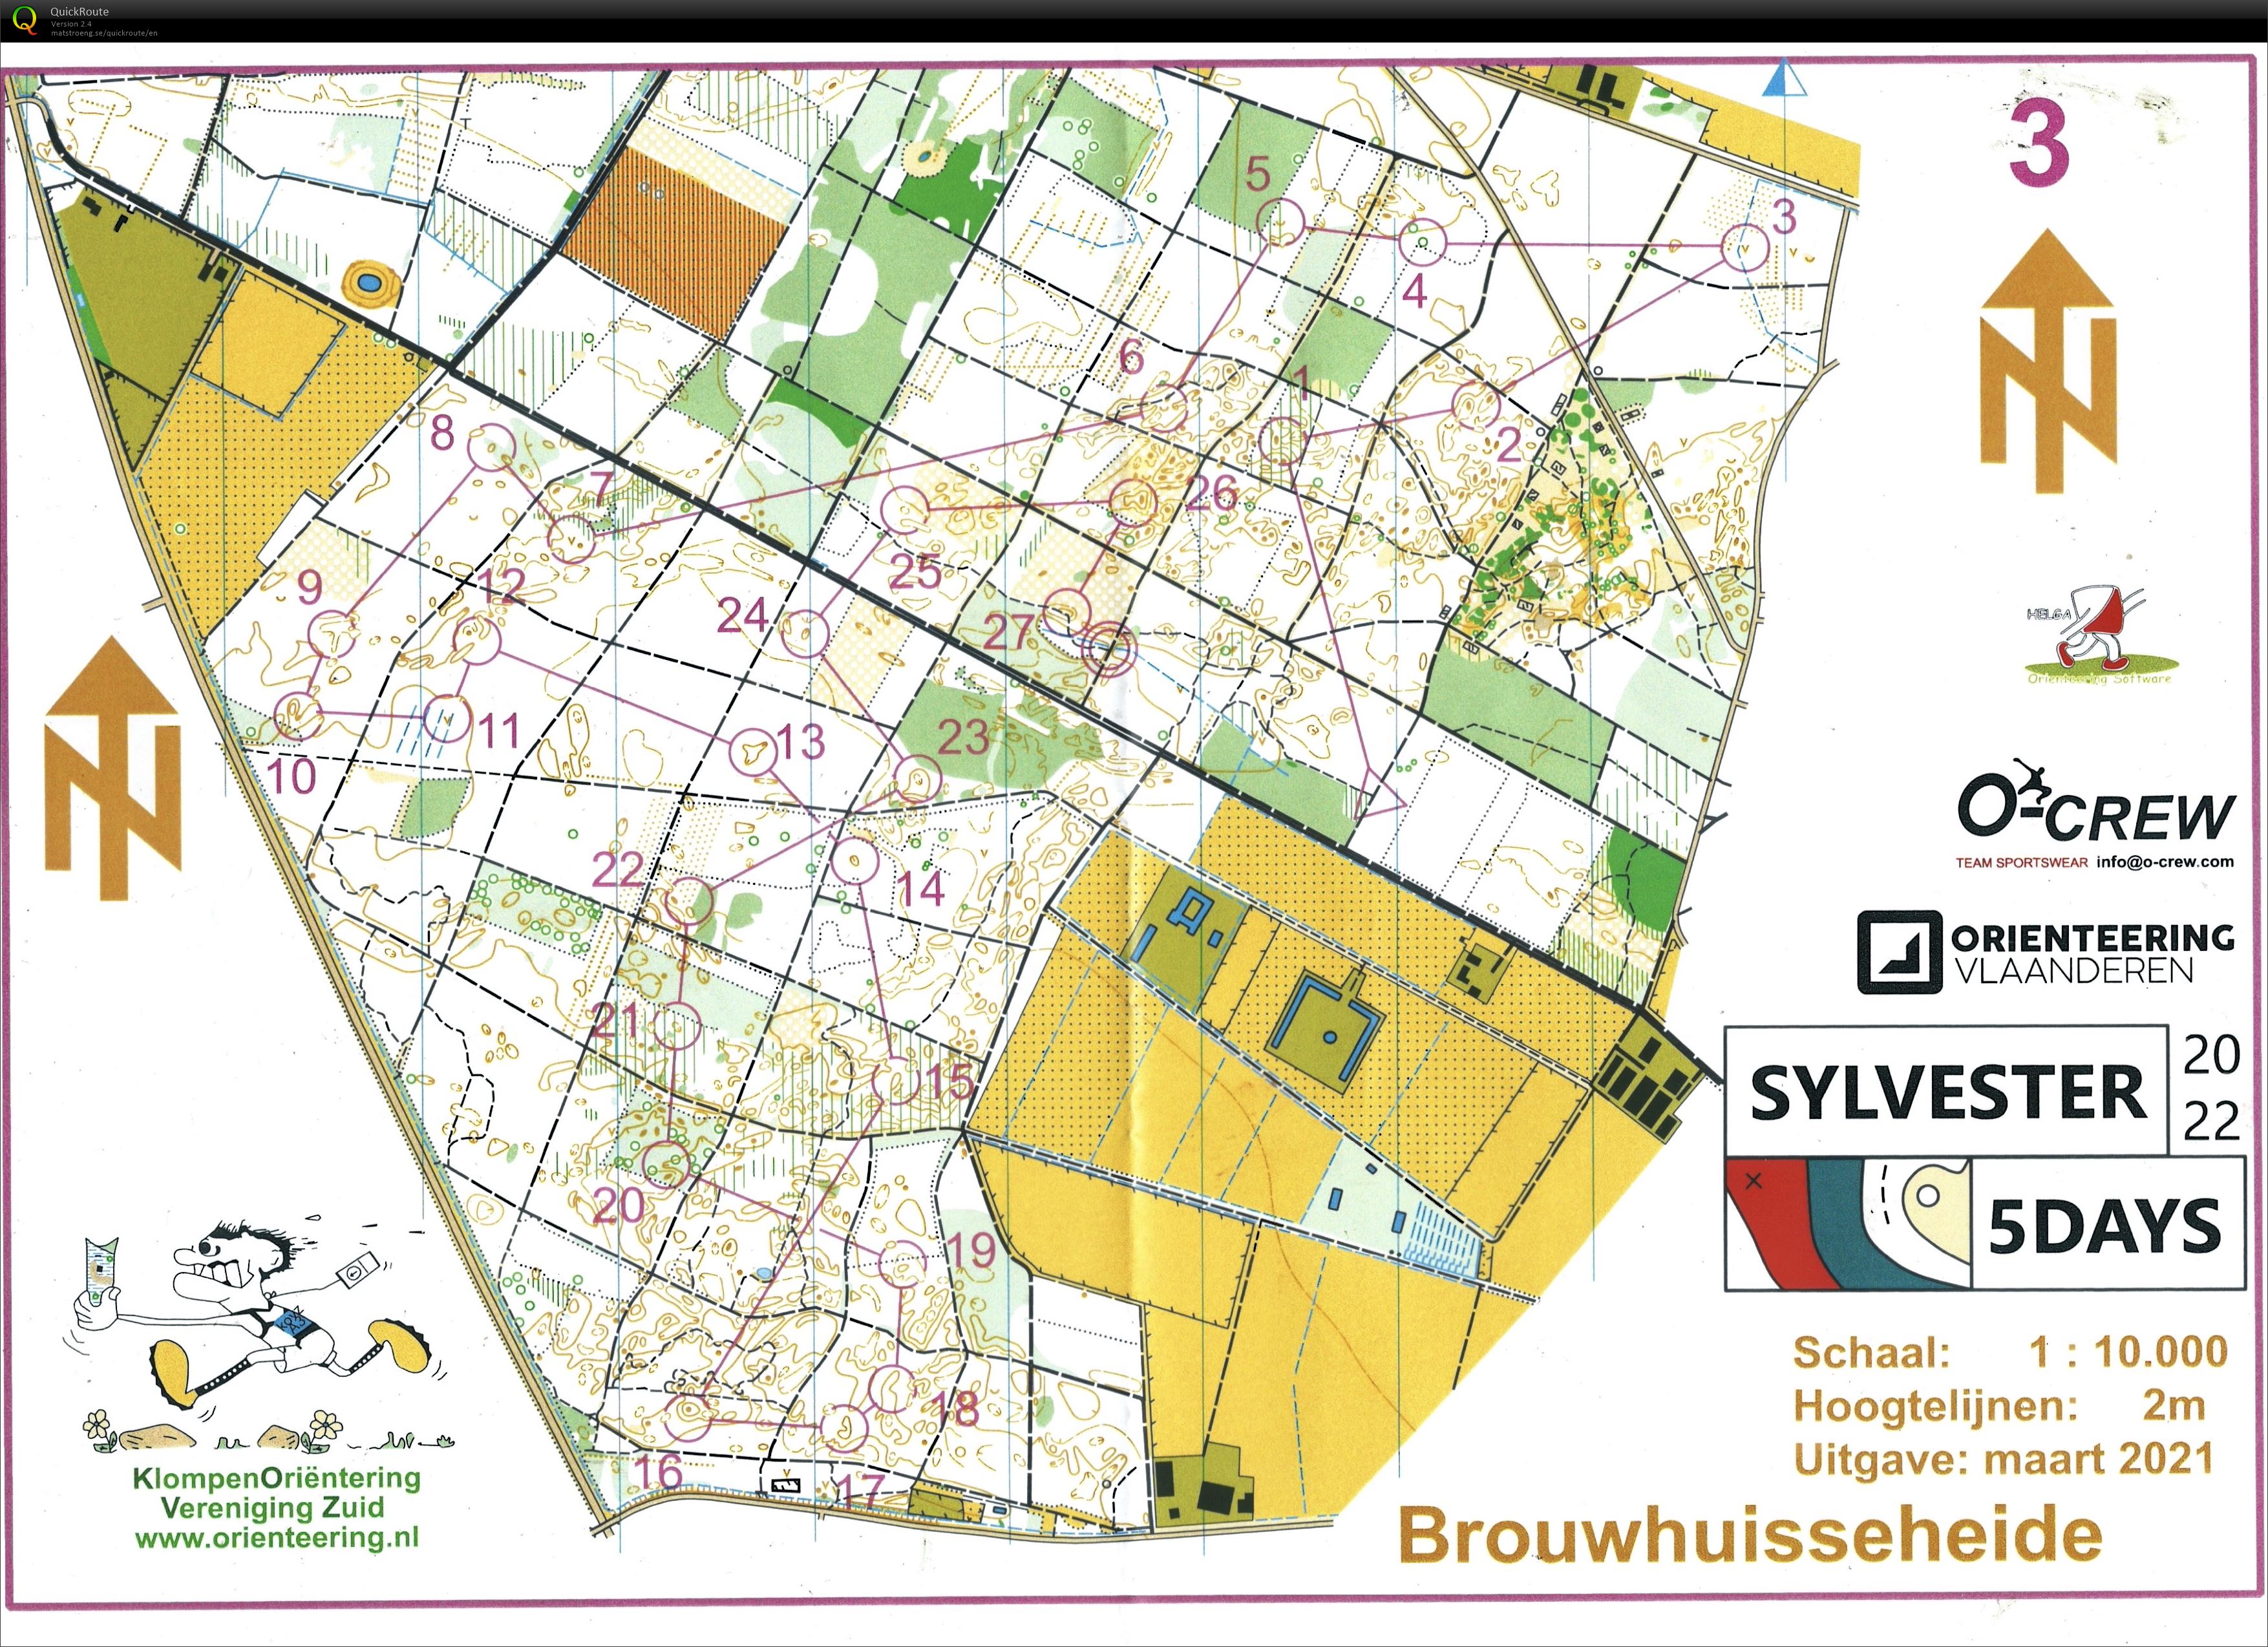 Sylvester 2022 - Day 3 - Brouwhuisseheide (2022-12-28)